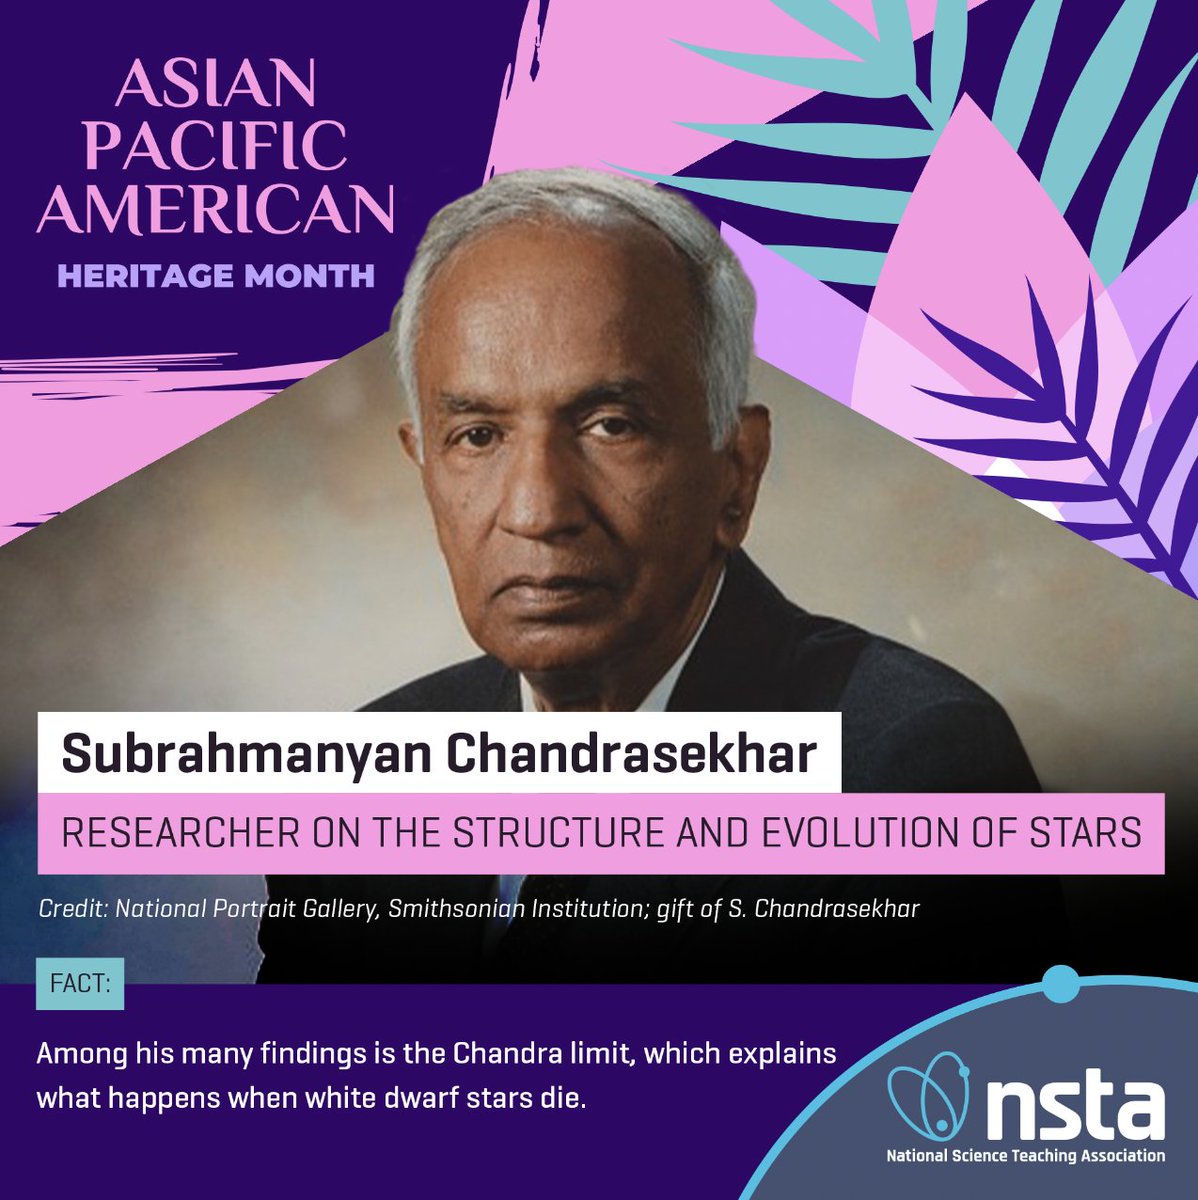 Today we celebrate the achievements of Subrahmanyan Chandrasekhar! 1983 Nobel Prize winner, Chandrasekhar led research on the structure and evolution of stars. Read more about him and his influence here: bit.ly/3UAC5IC #AsianPacificAmericanHeritageMonth